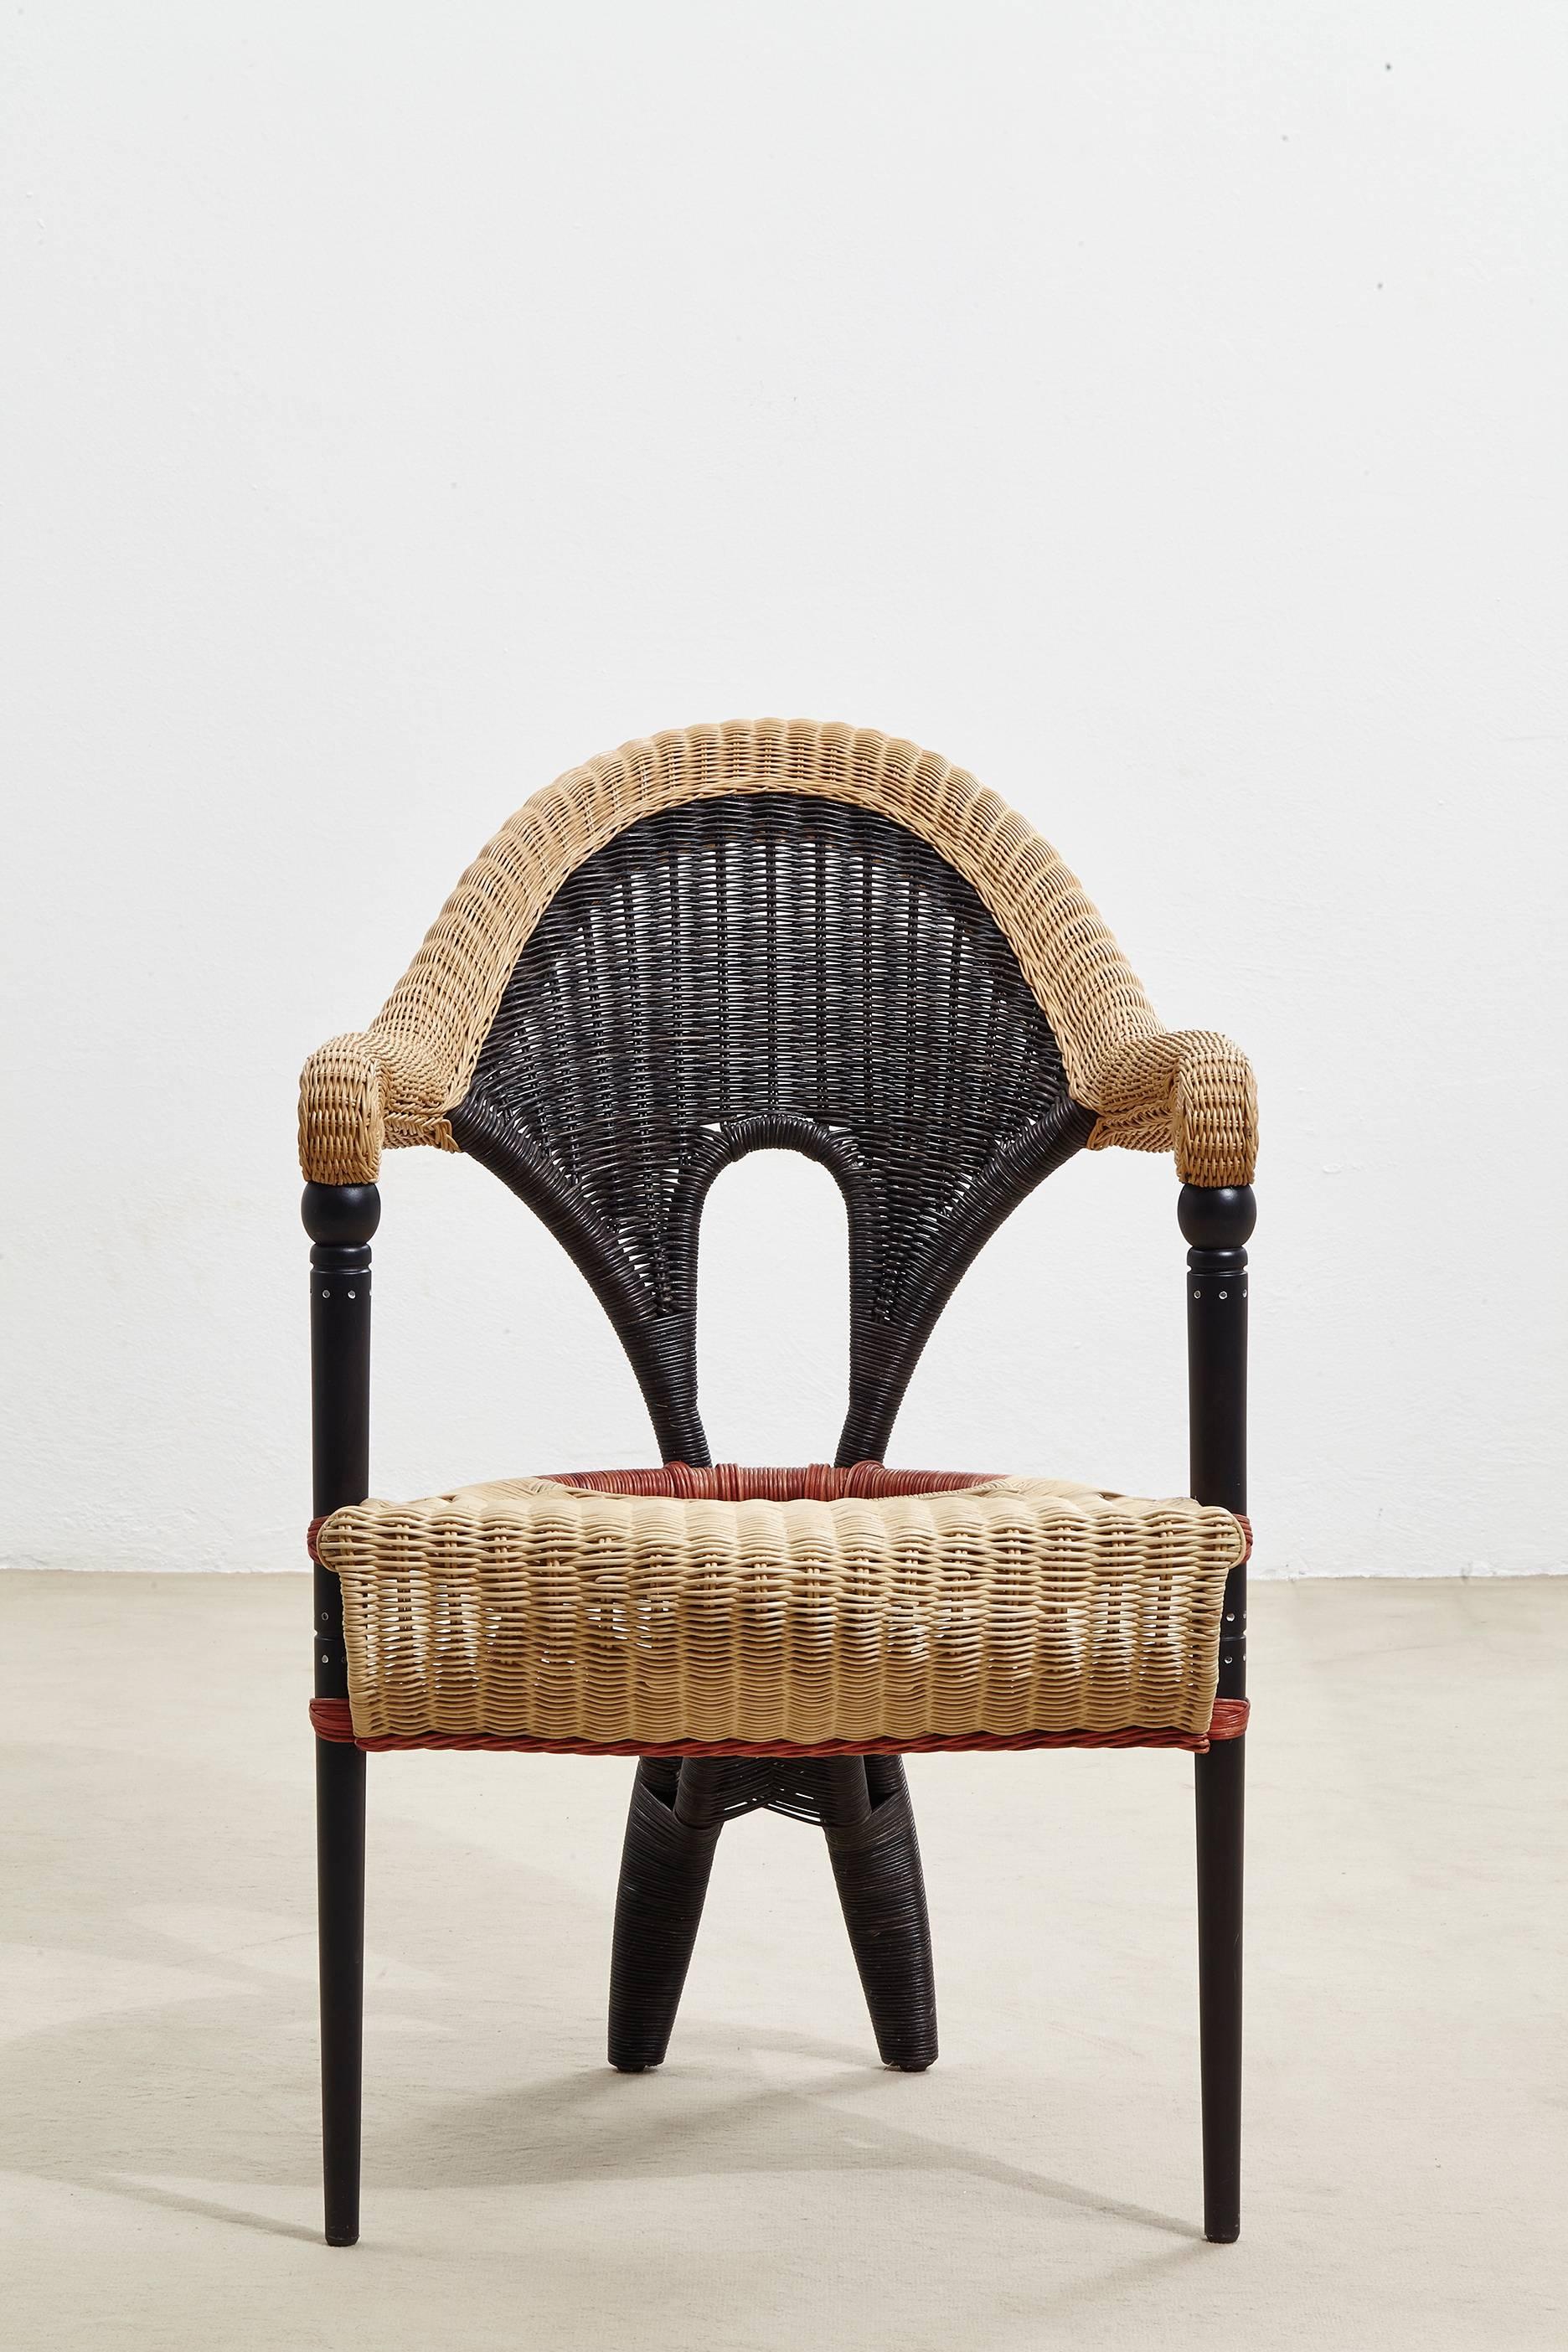 An elegant small armchair with sinuous lines designed by Borek Sipek for Driade. The organic form of the seat is typical of the designer's work. The seat and back of the chair are in rattan covered with natural, red and black colored wicker in